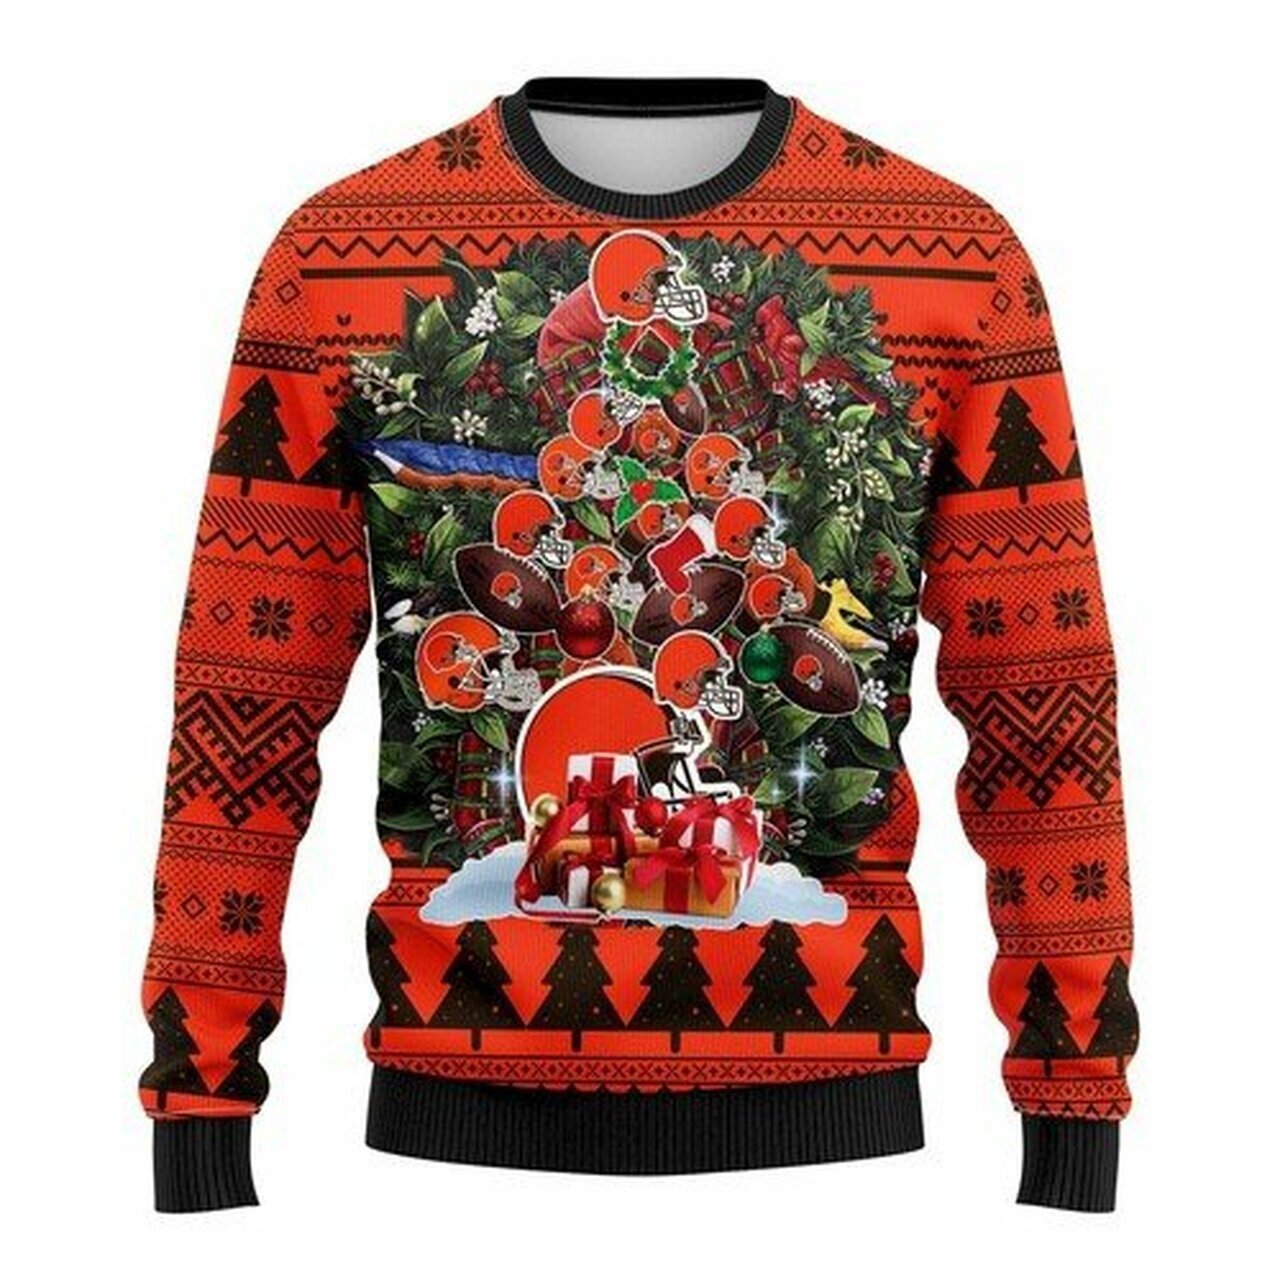 [ COOL ] NFL Cleveland Browns christmas tree ugly sweater – Saleoff 311221